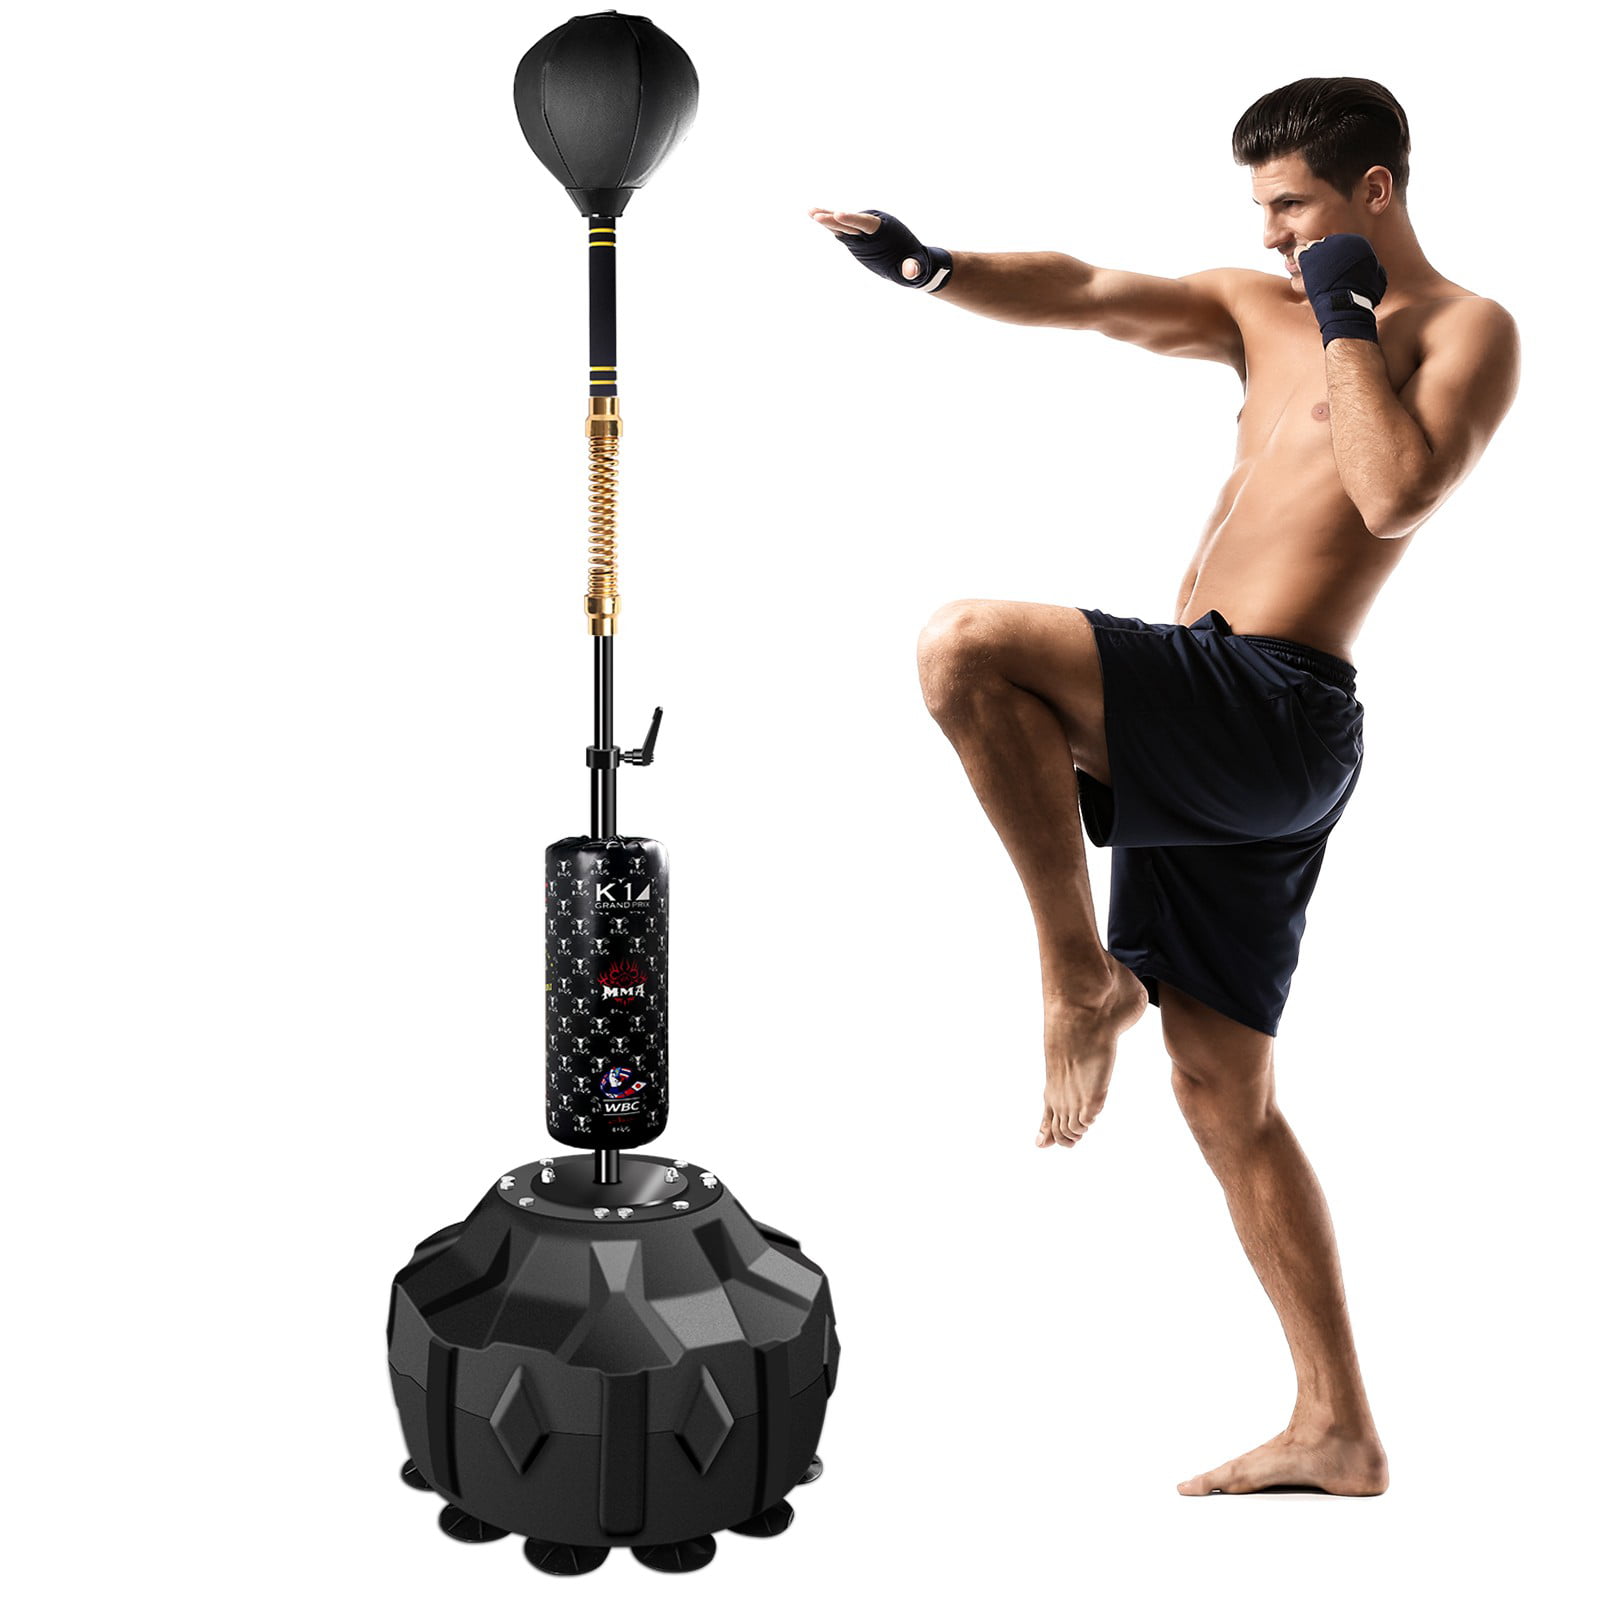 Adjustable Freestanding Punch Speed Ball Details about   Punching Reflex Boxing Bag with Stand 